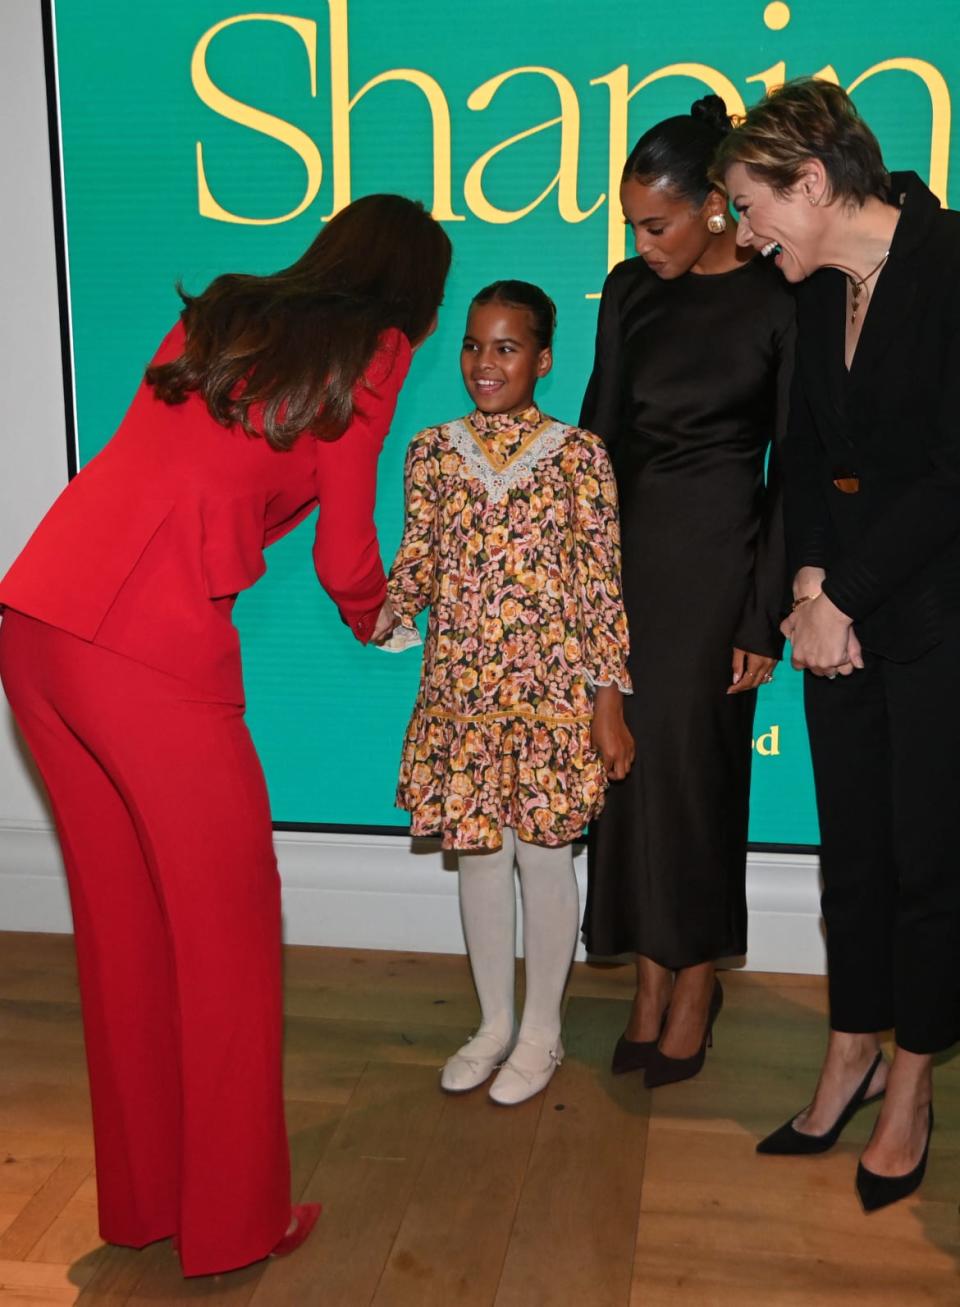 <div class="inline-image__caption"><p>Kate wore a bright red pantsuit Monday evening (Photo by EDDIE MULHOLLAND/POOL/AFP via Getty Images)"</p></div> <div class="inline-image__credit">EDDIE MULHOLLAND / Getty Images</div>